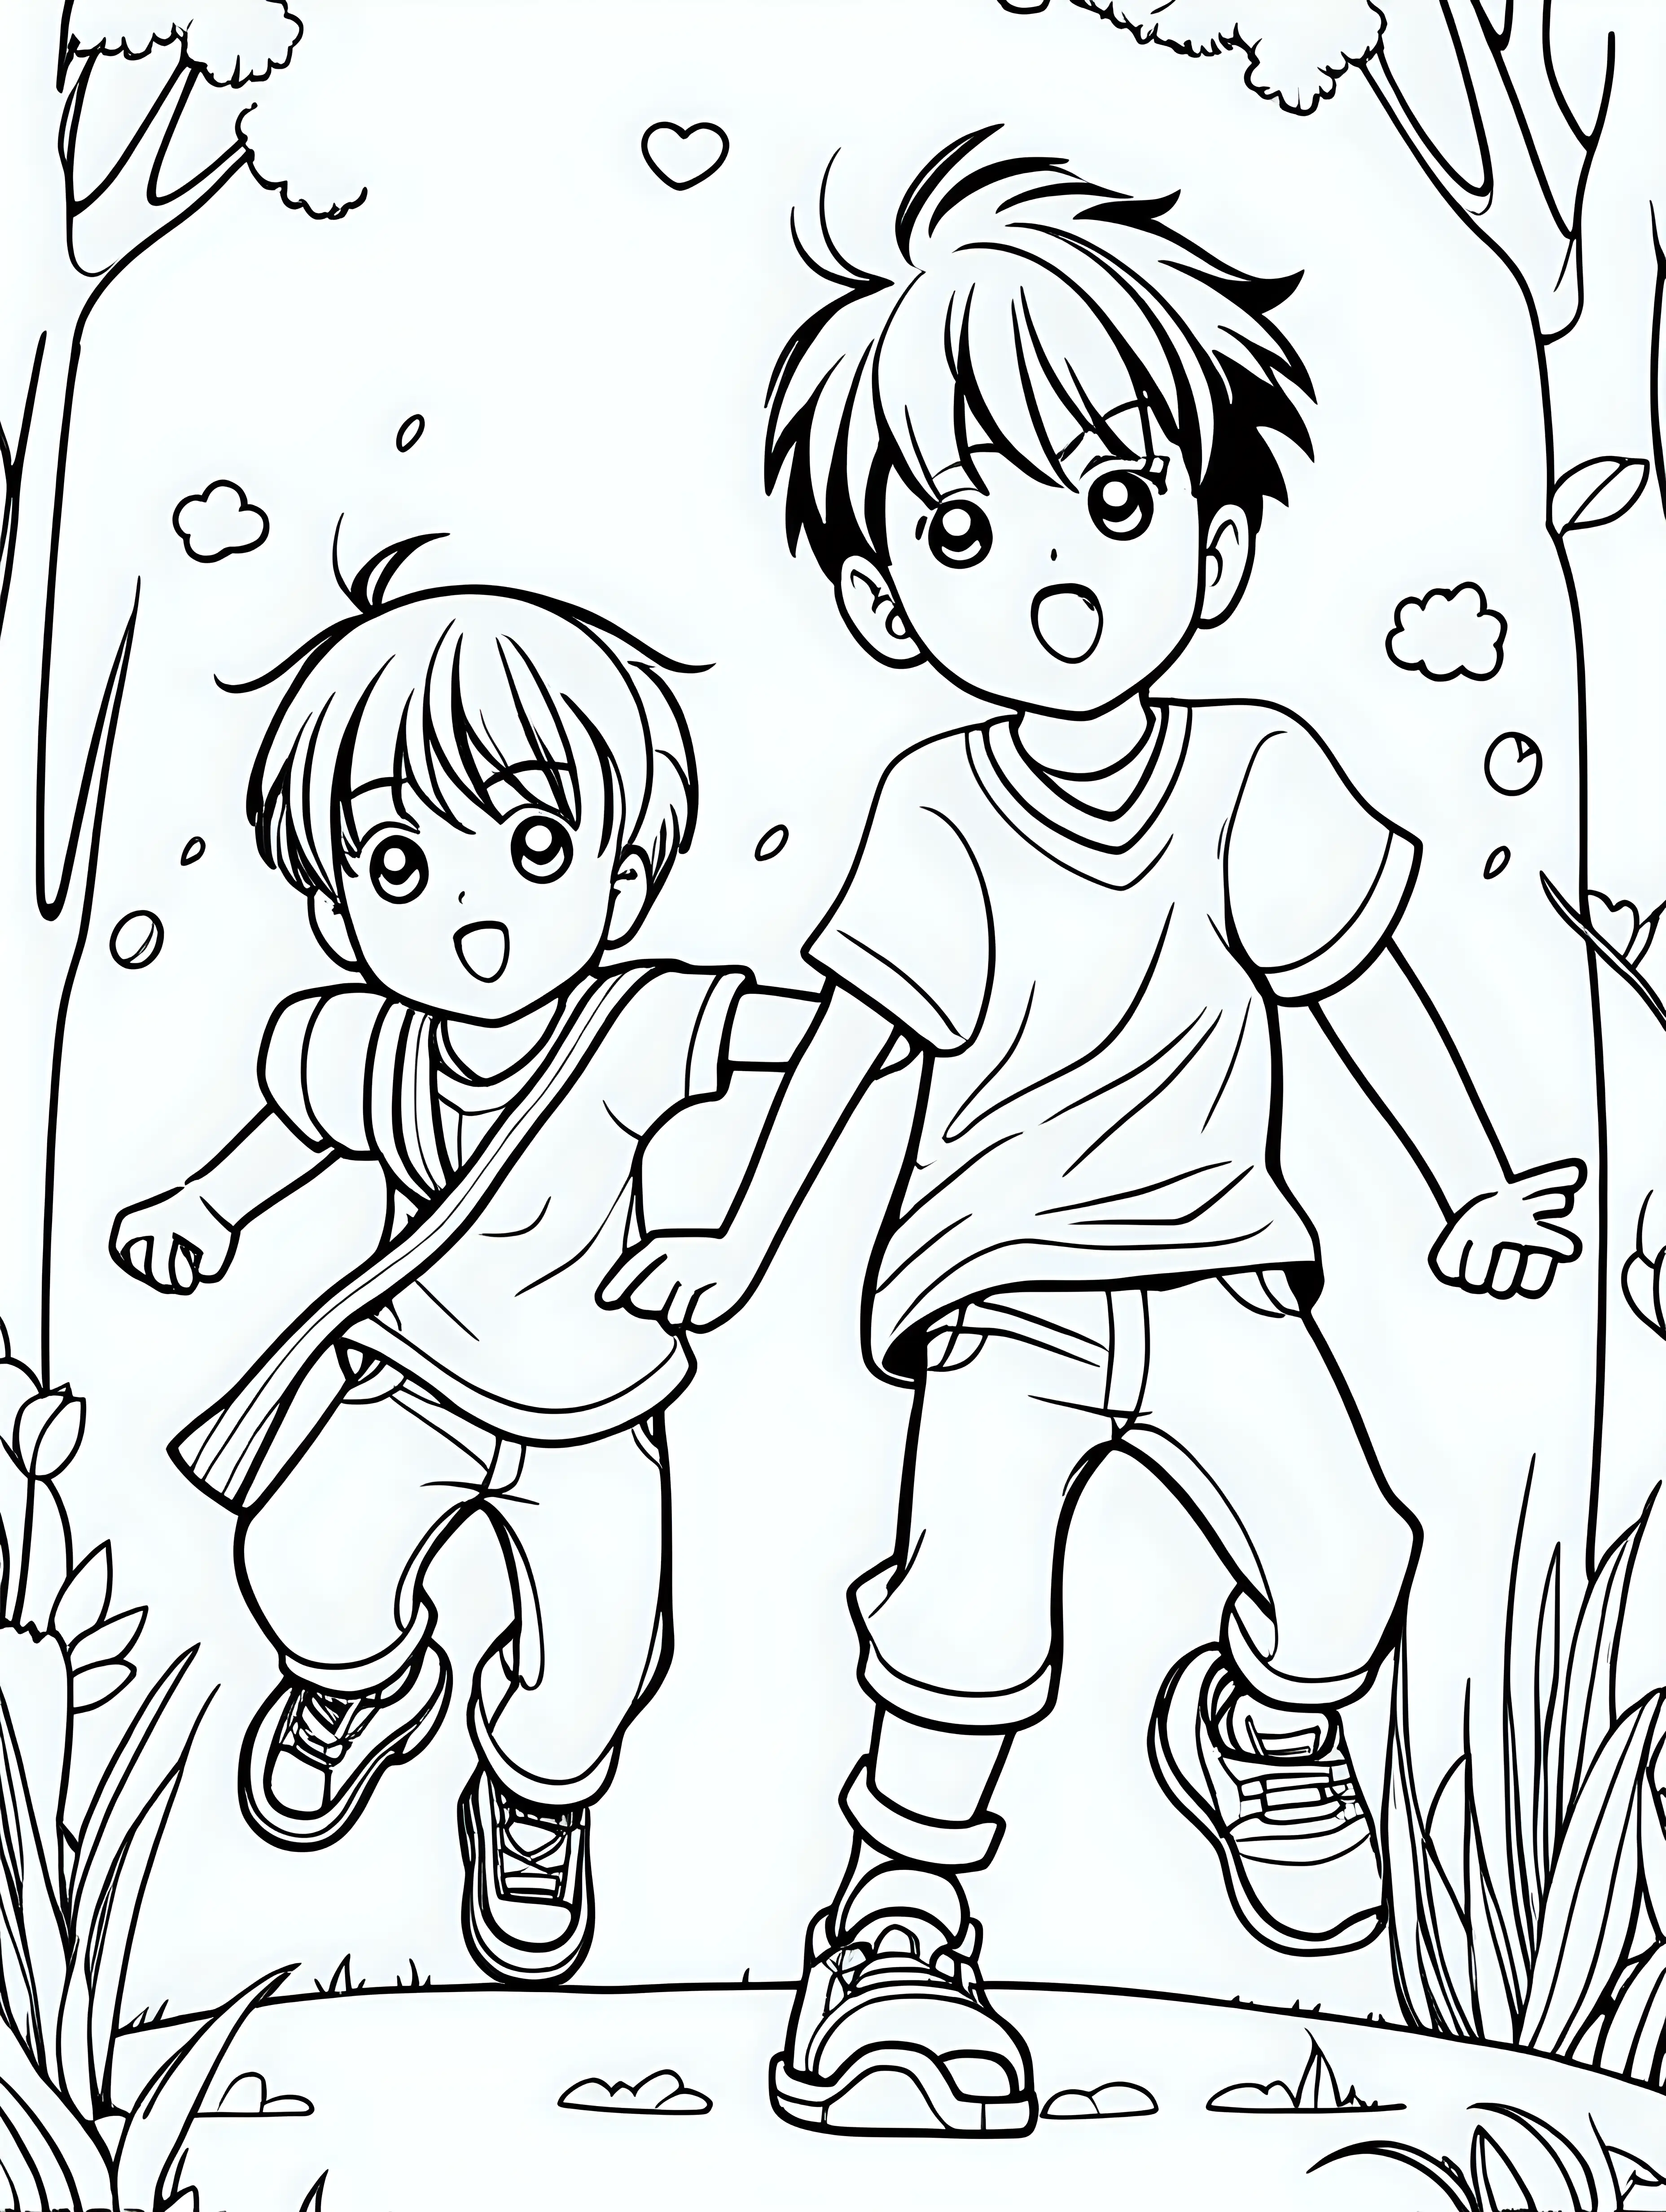 Manga Kids Coloring Page Playful Duo on a White Canvas